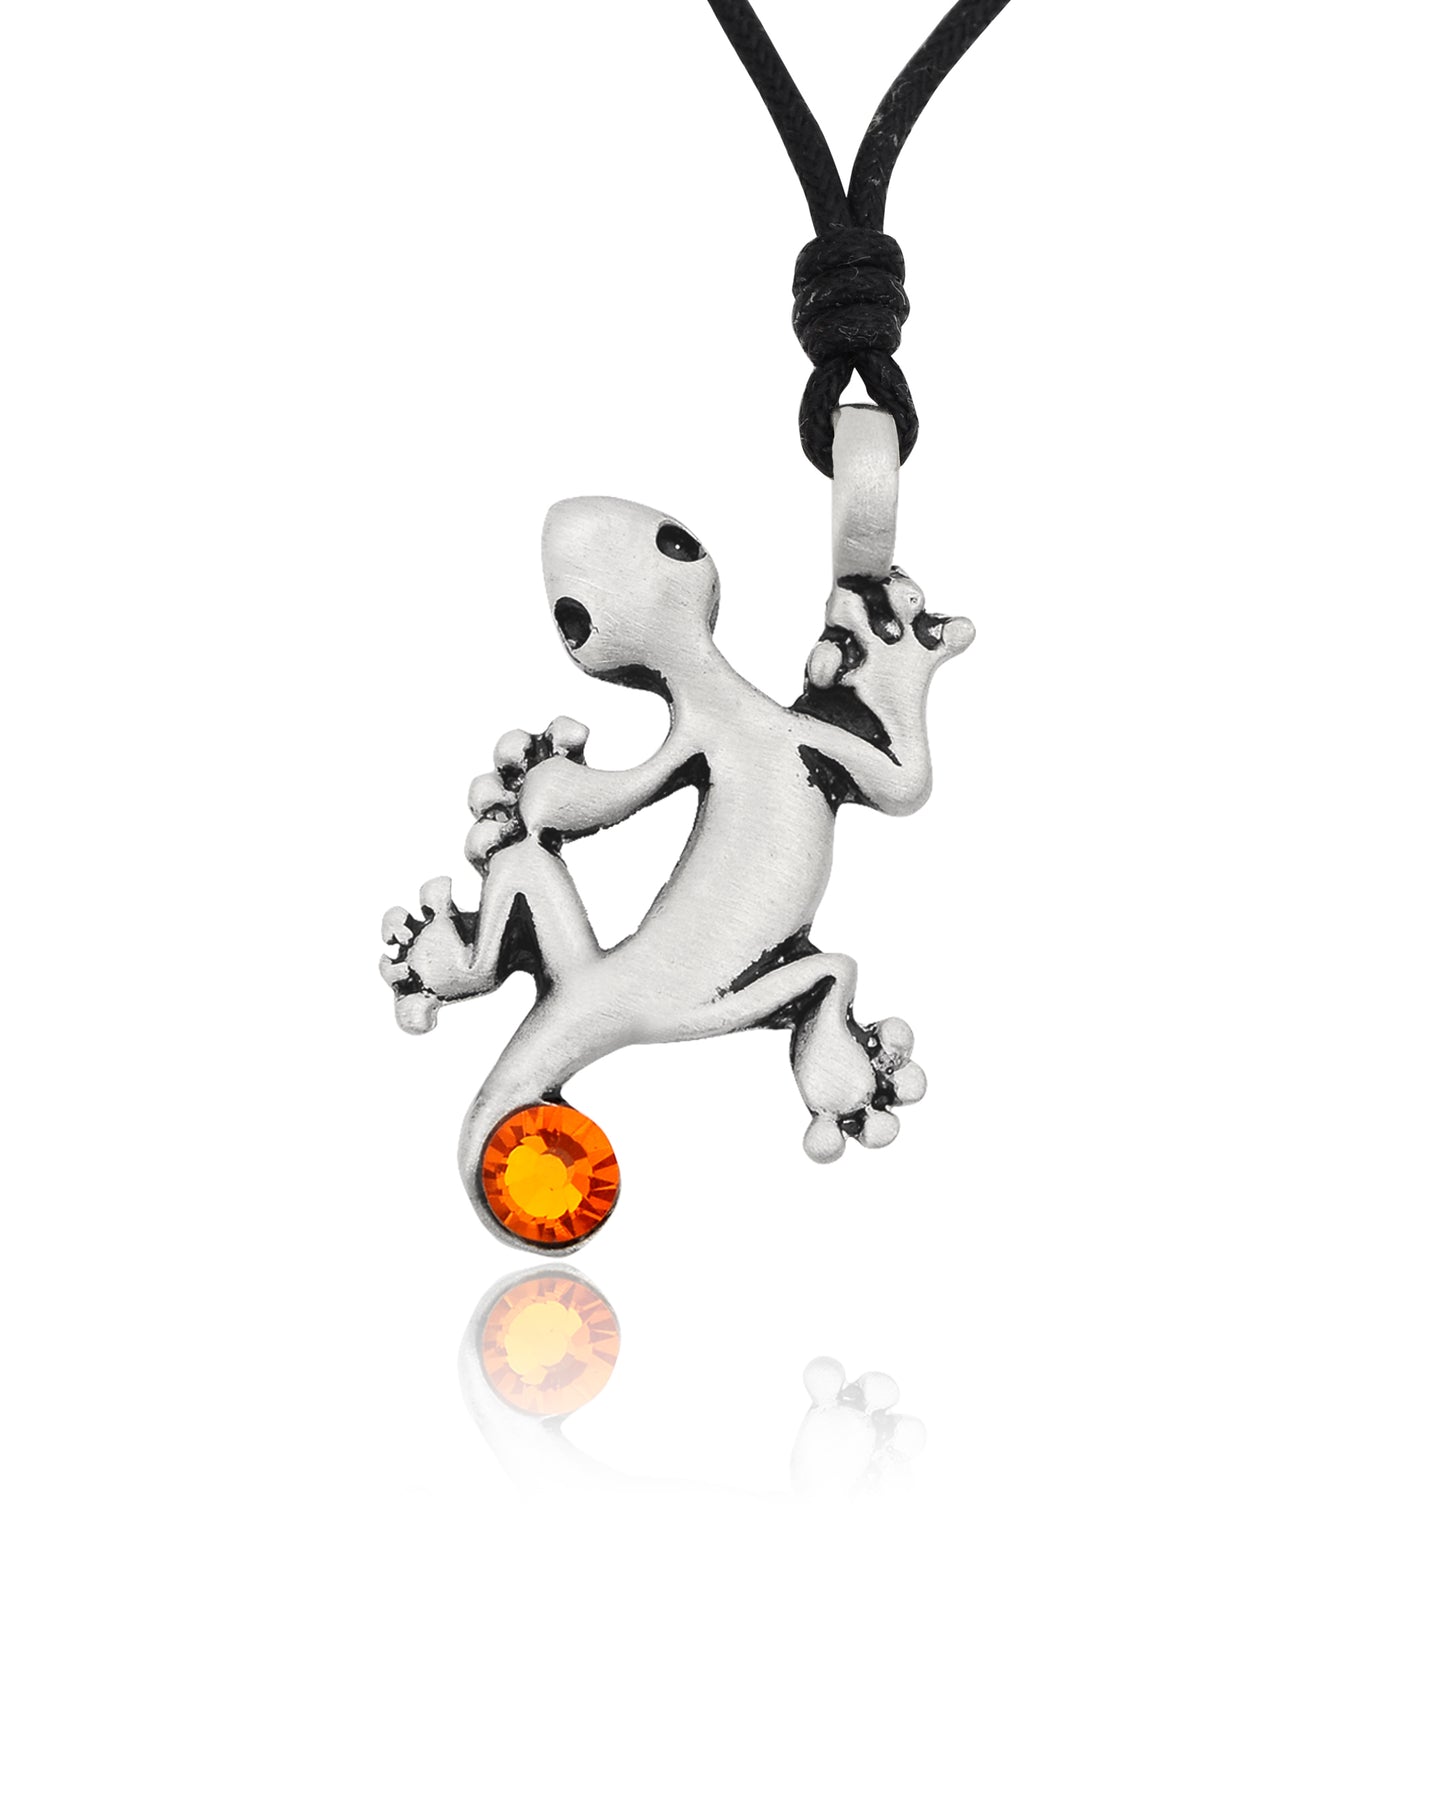 New Lizard Gecko Silver Pewter Charm Necklace Pendant Jewelry